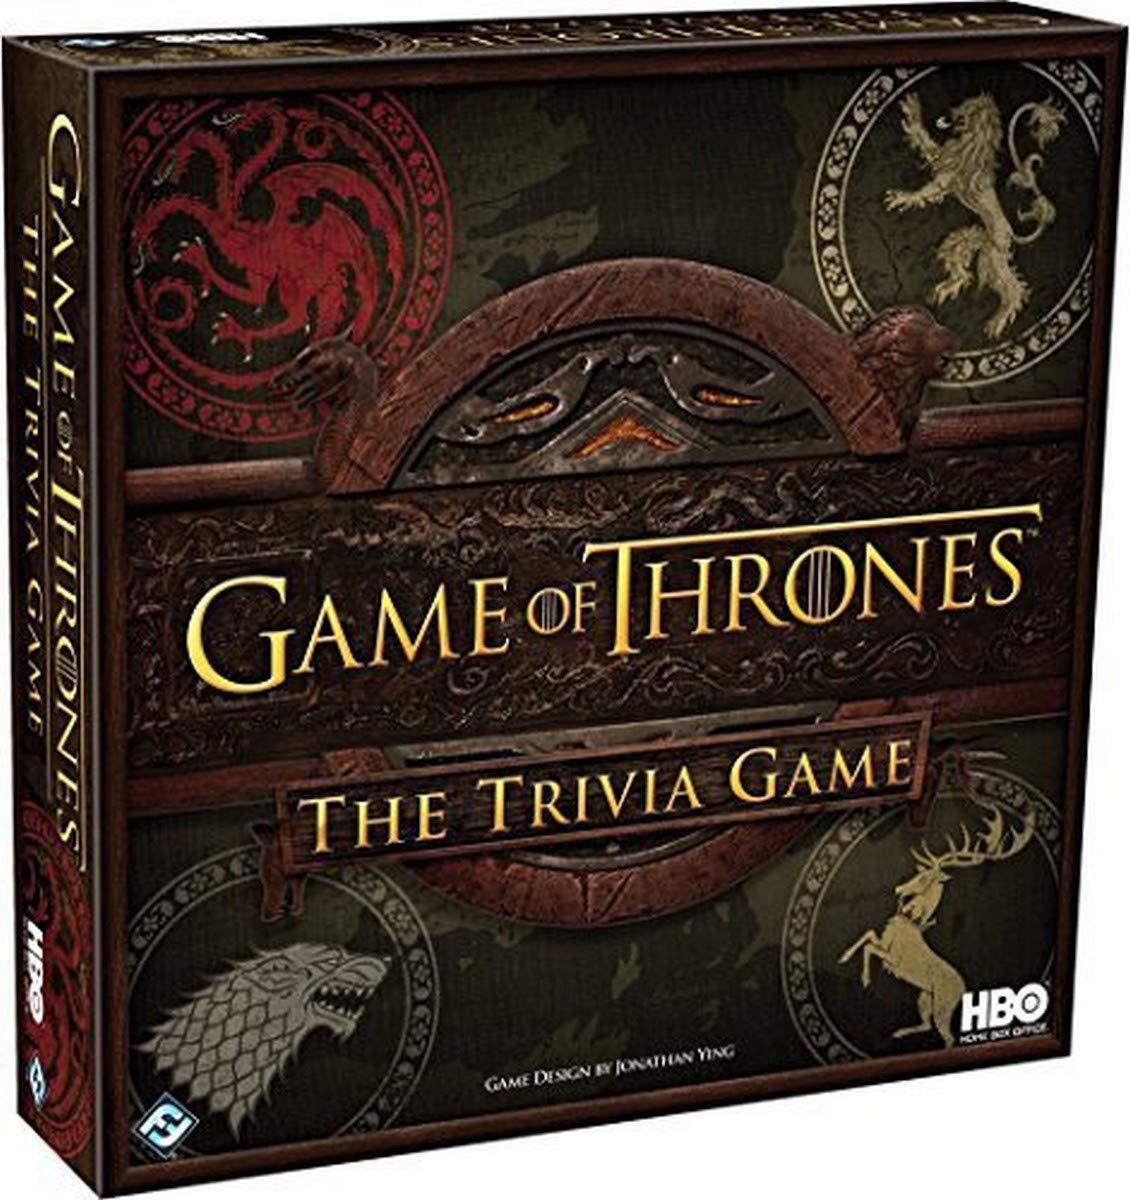 Fantasy Flight Games hbo game of thrones trivia game